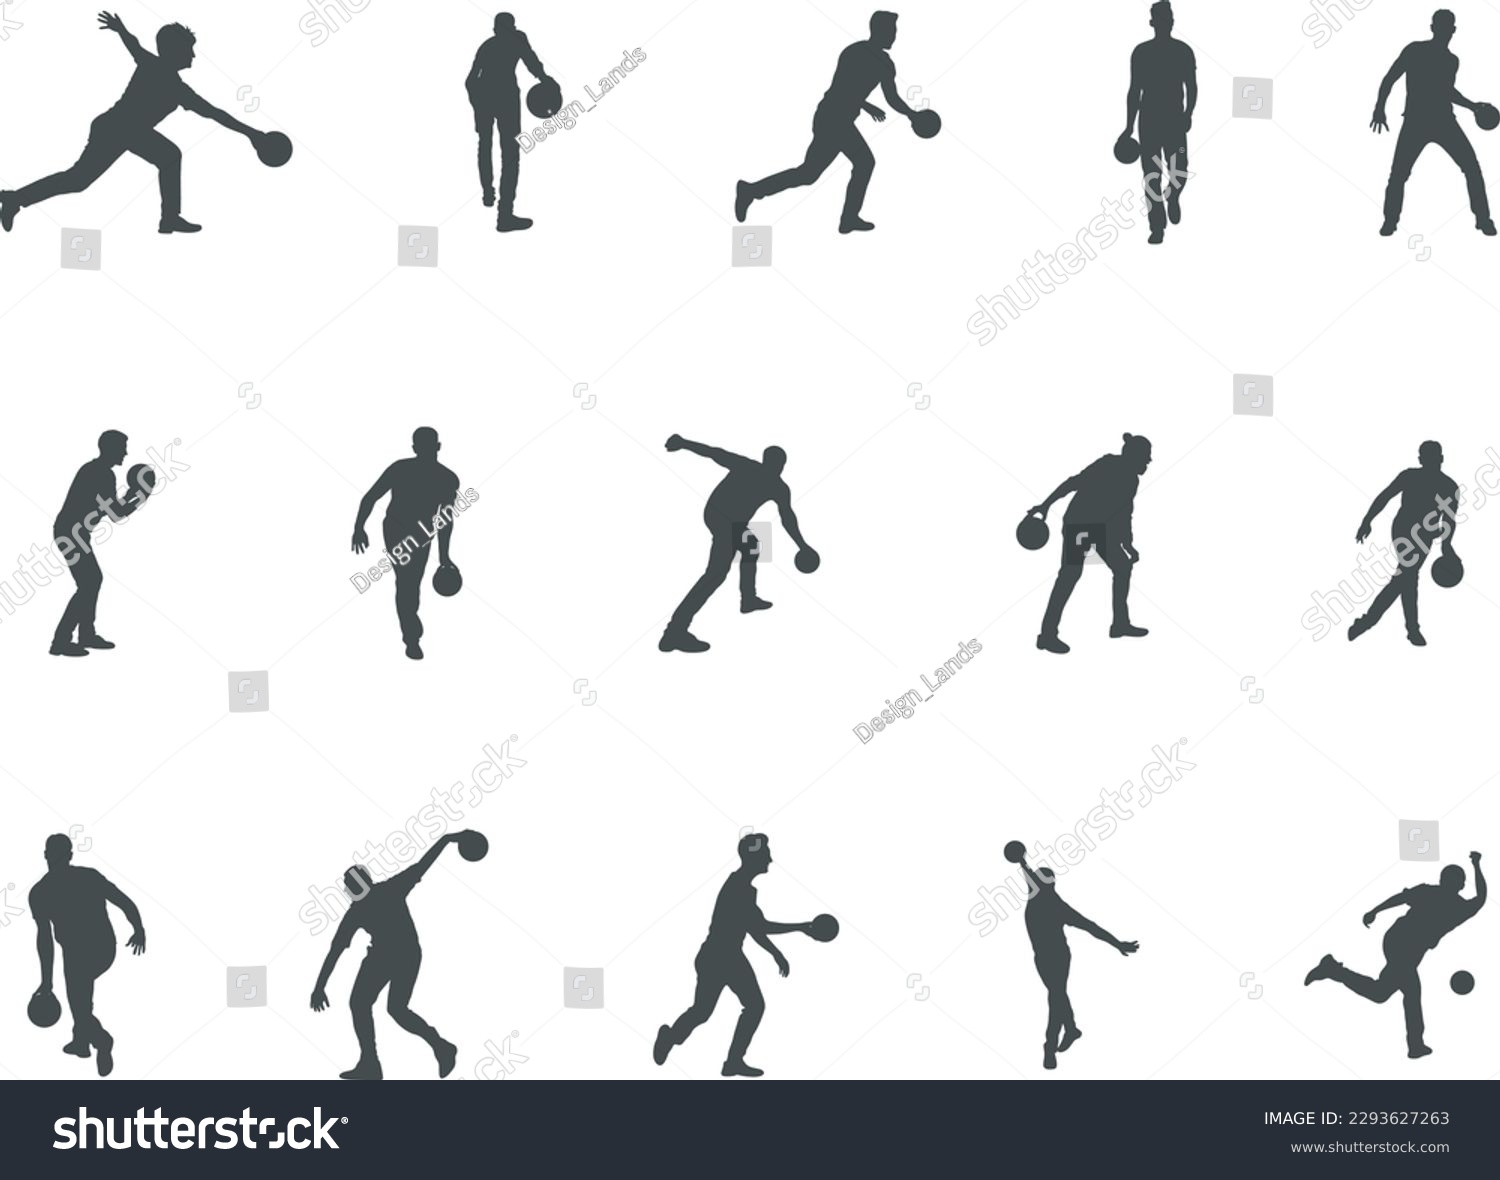 SVG of Bowling player silhouettes, Bowling people silhouettes, Bowling player SVG, Bowling player vector svg